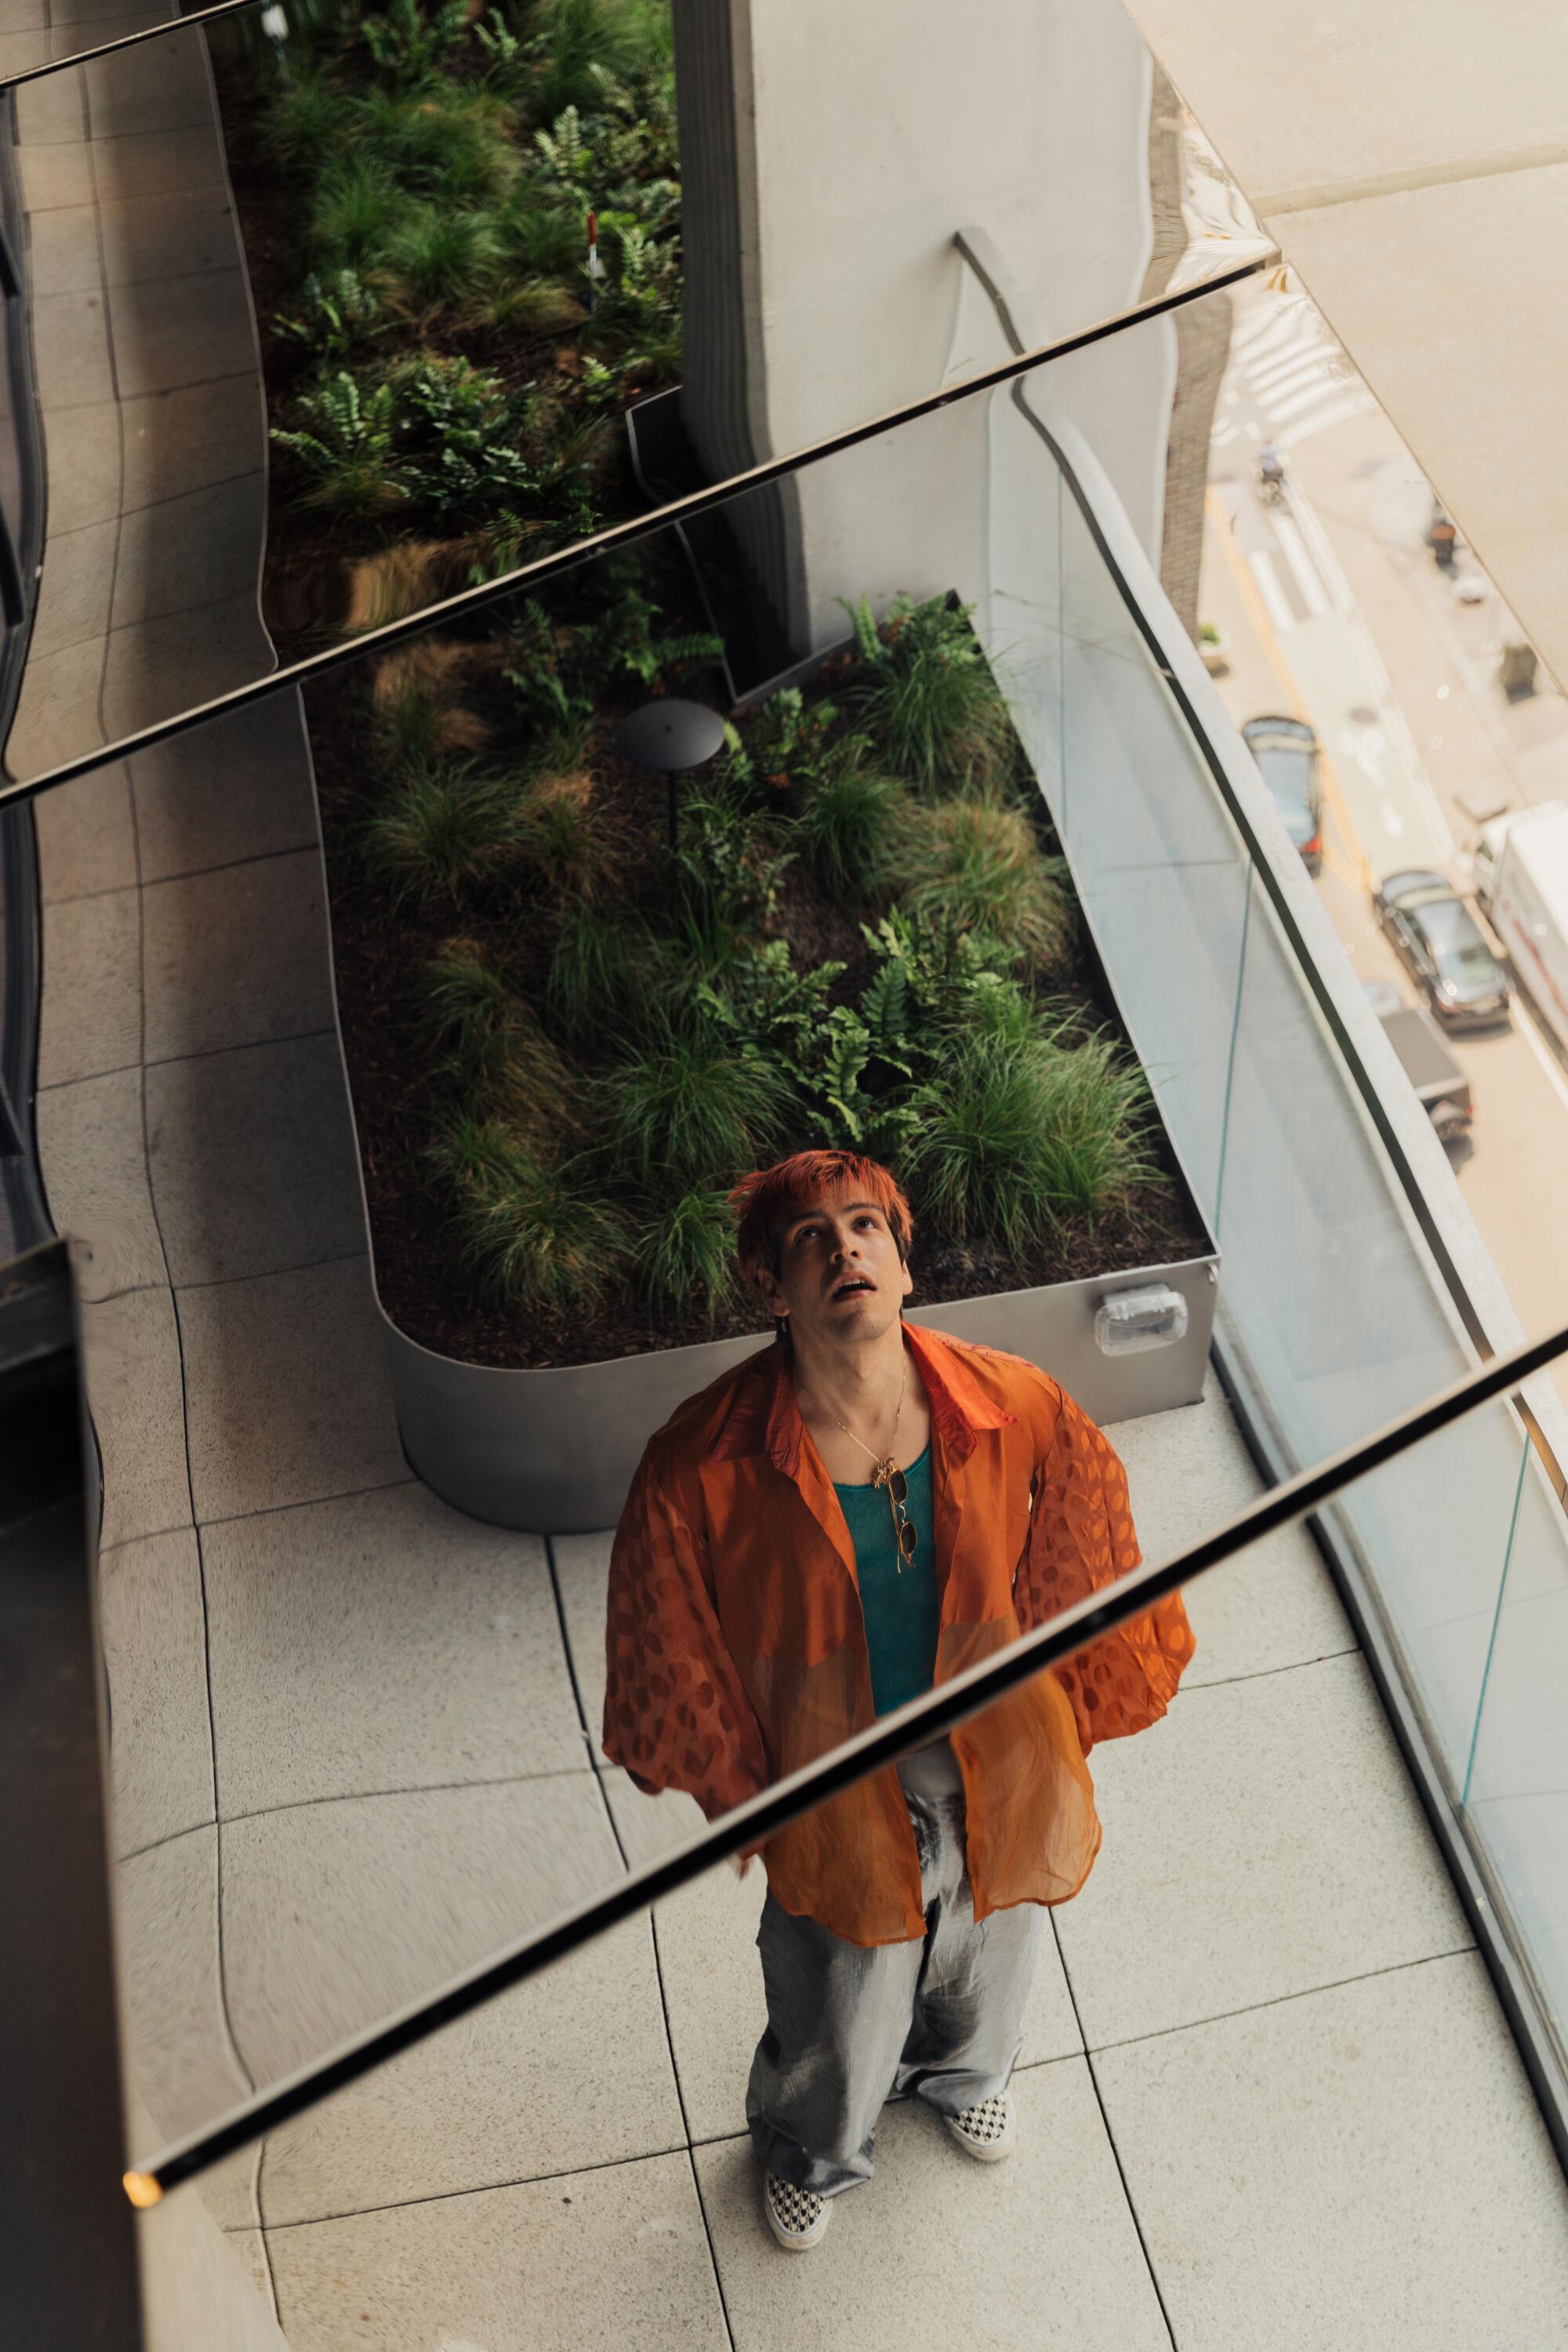 An actor-director in an orange shirt looking up, seen from above, with a bed of plants behind